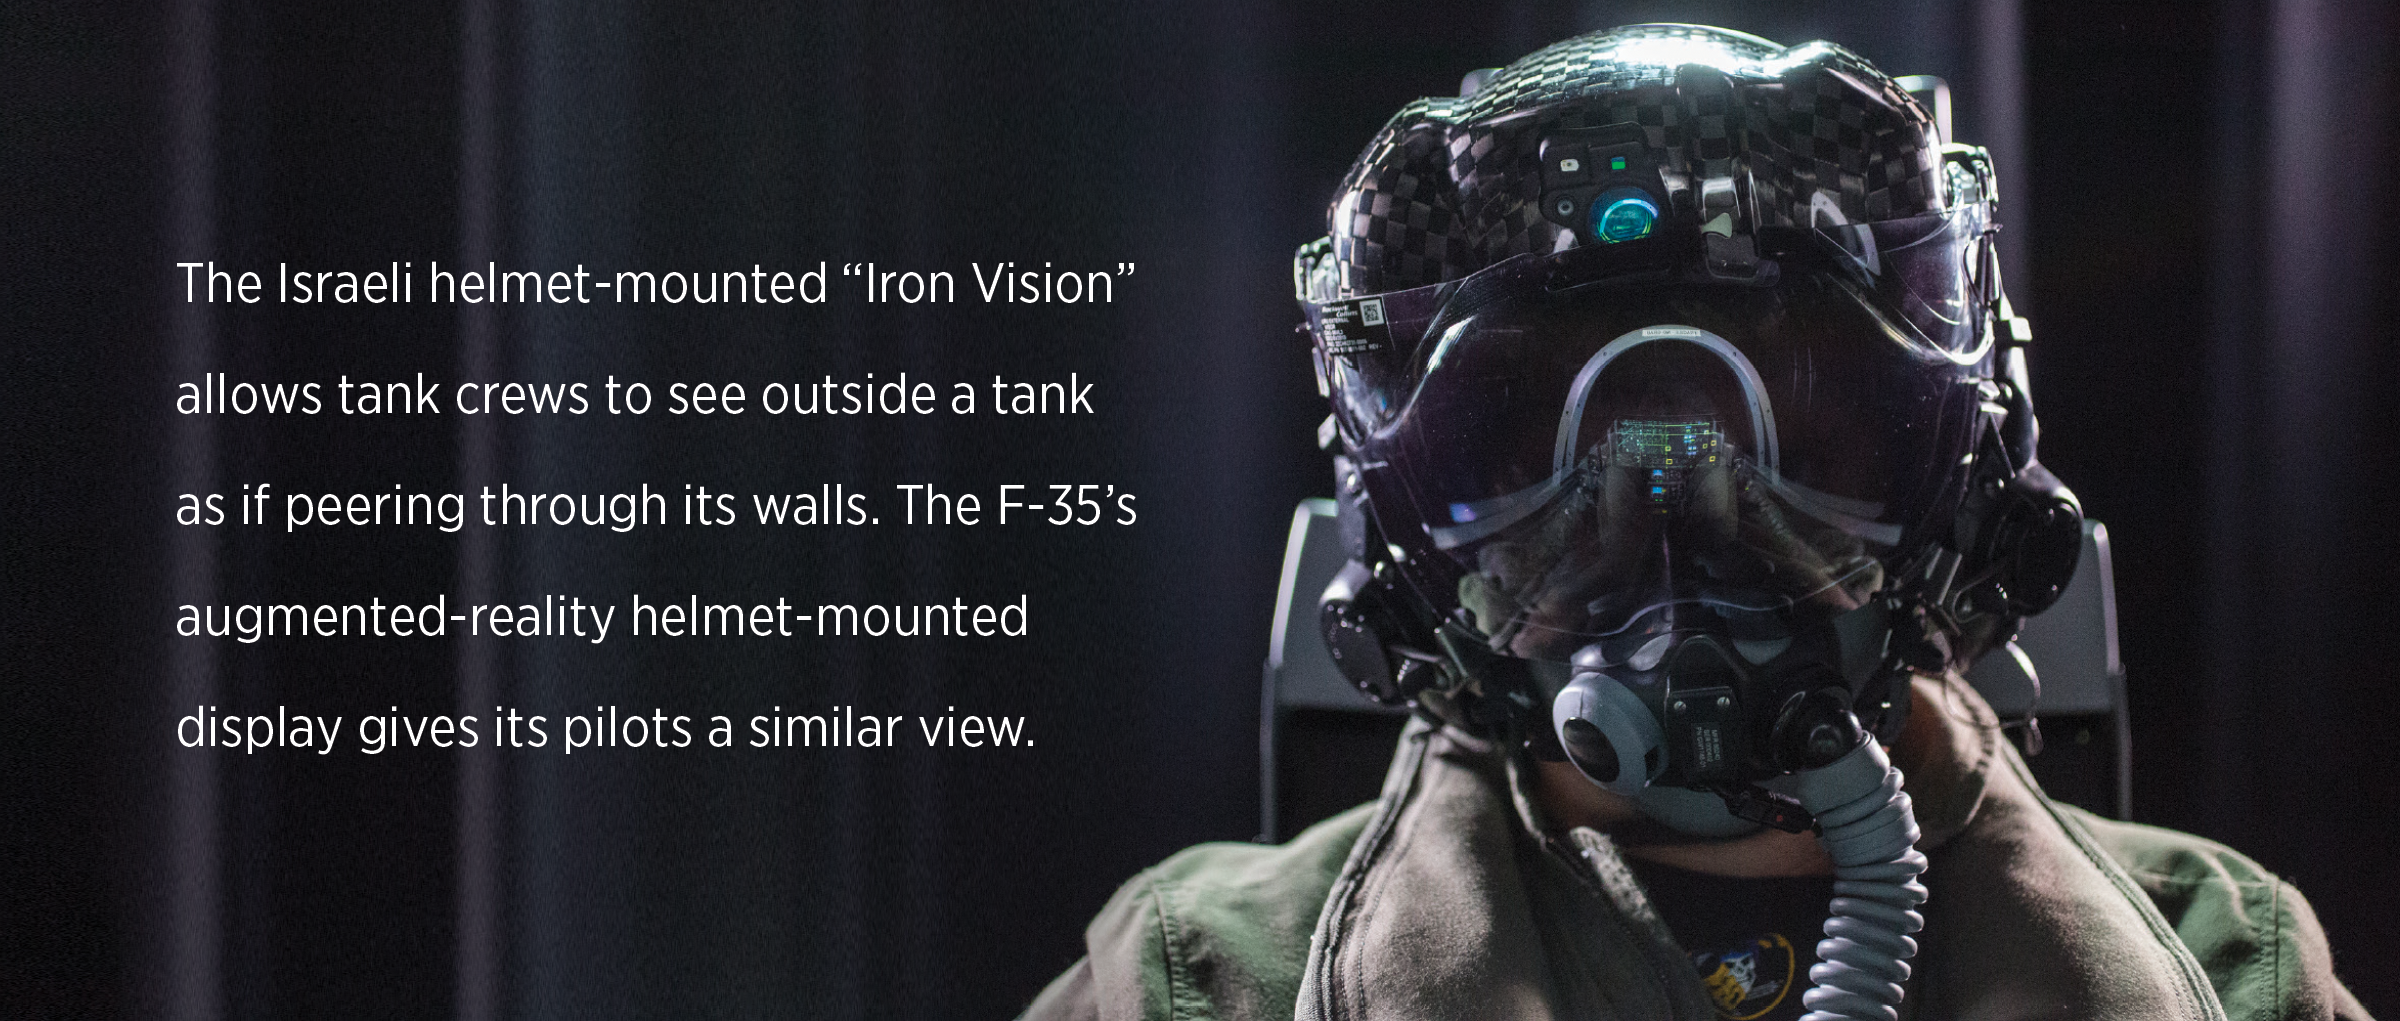 The Israeli helmet-mounted “Iron Vision” allows tank crews to see outside a tank as if peering through its walls. The F-35’s augmented-reality helmet-mounted  display gives its pilots a similar view.